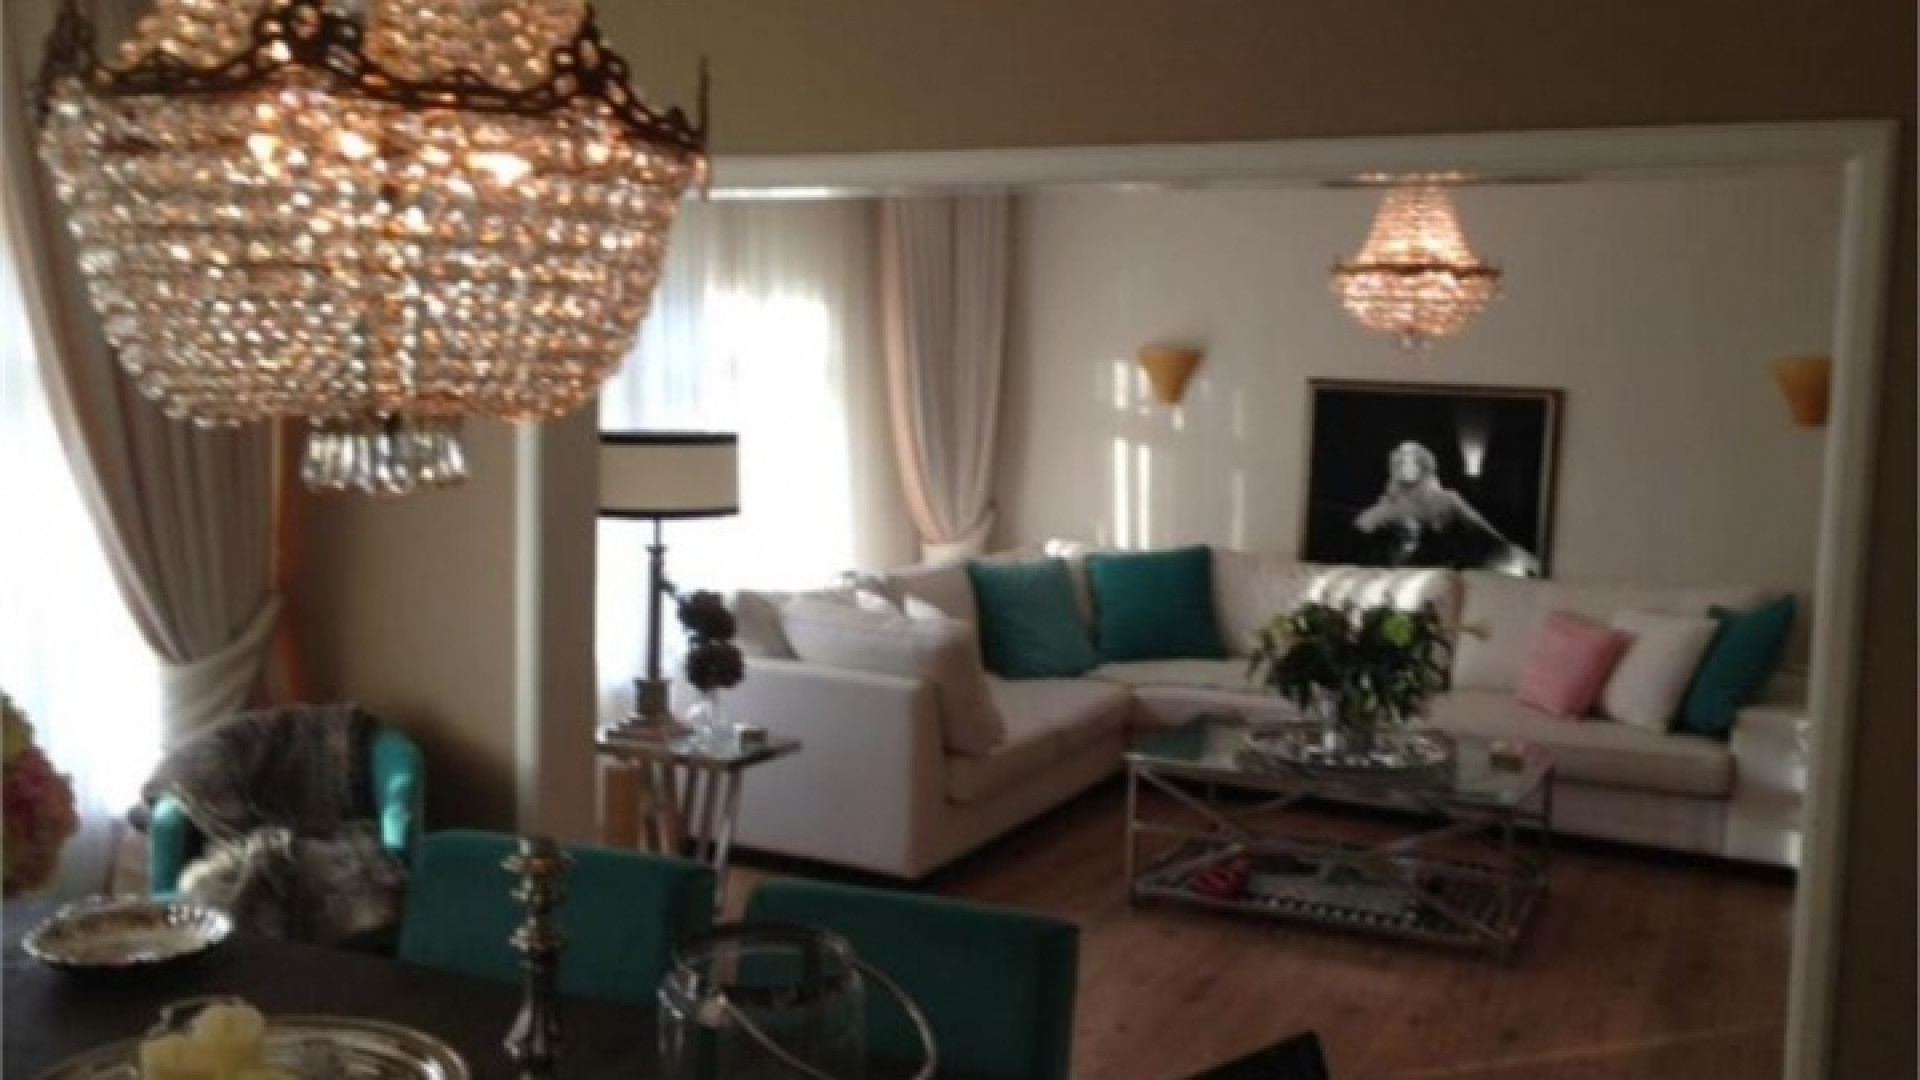 Luxe appartement Patricia Paay te huur. Zie foto's!!